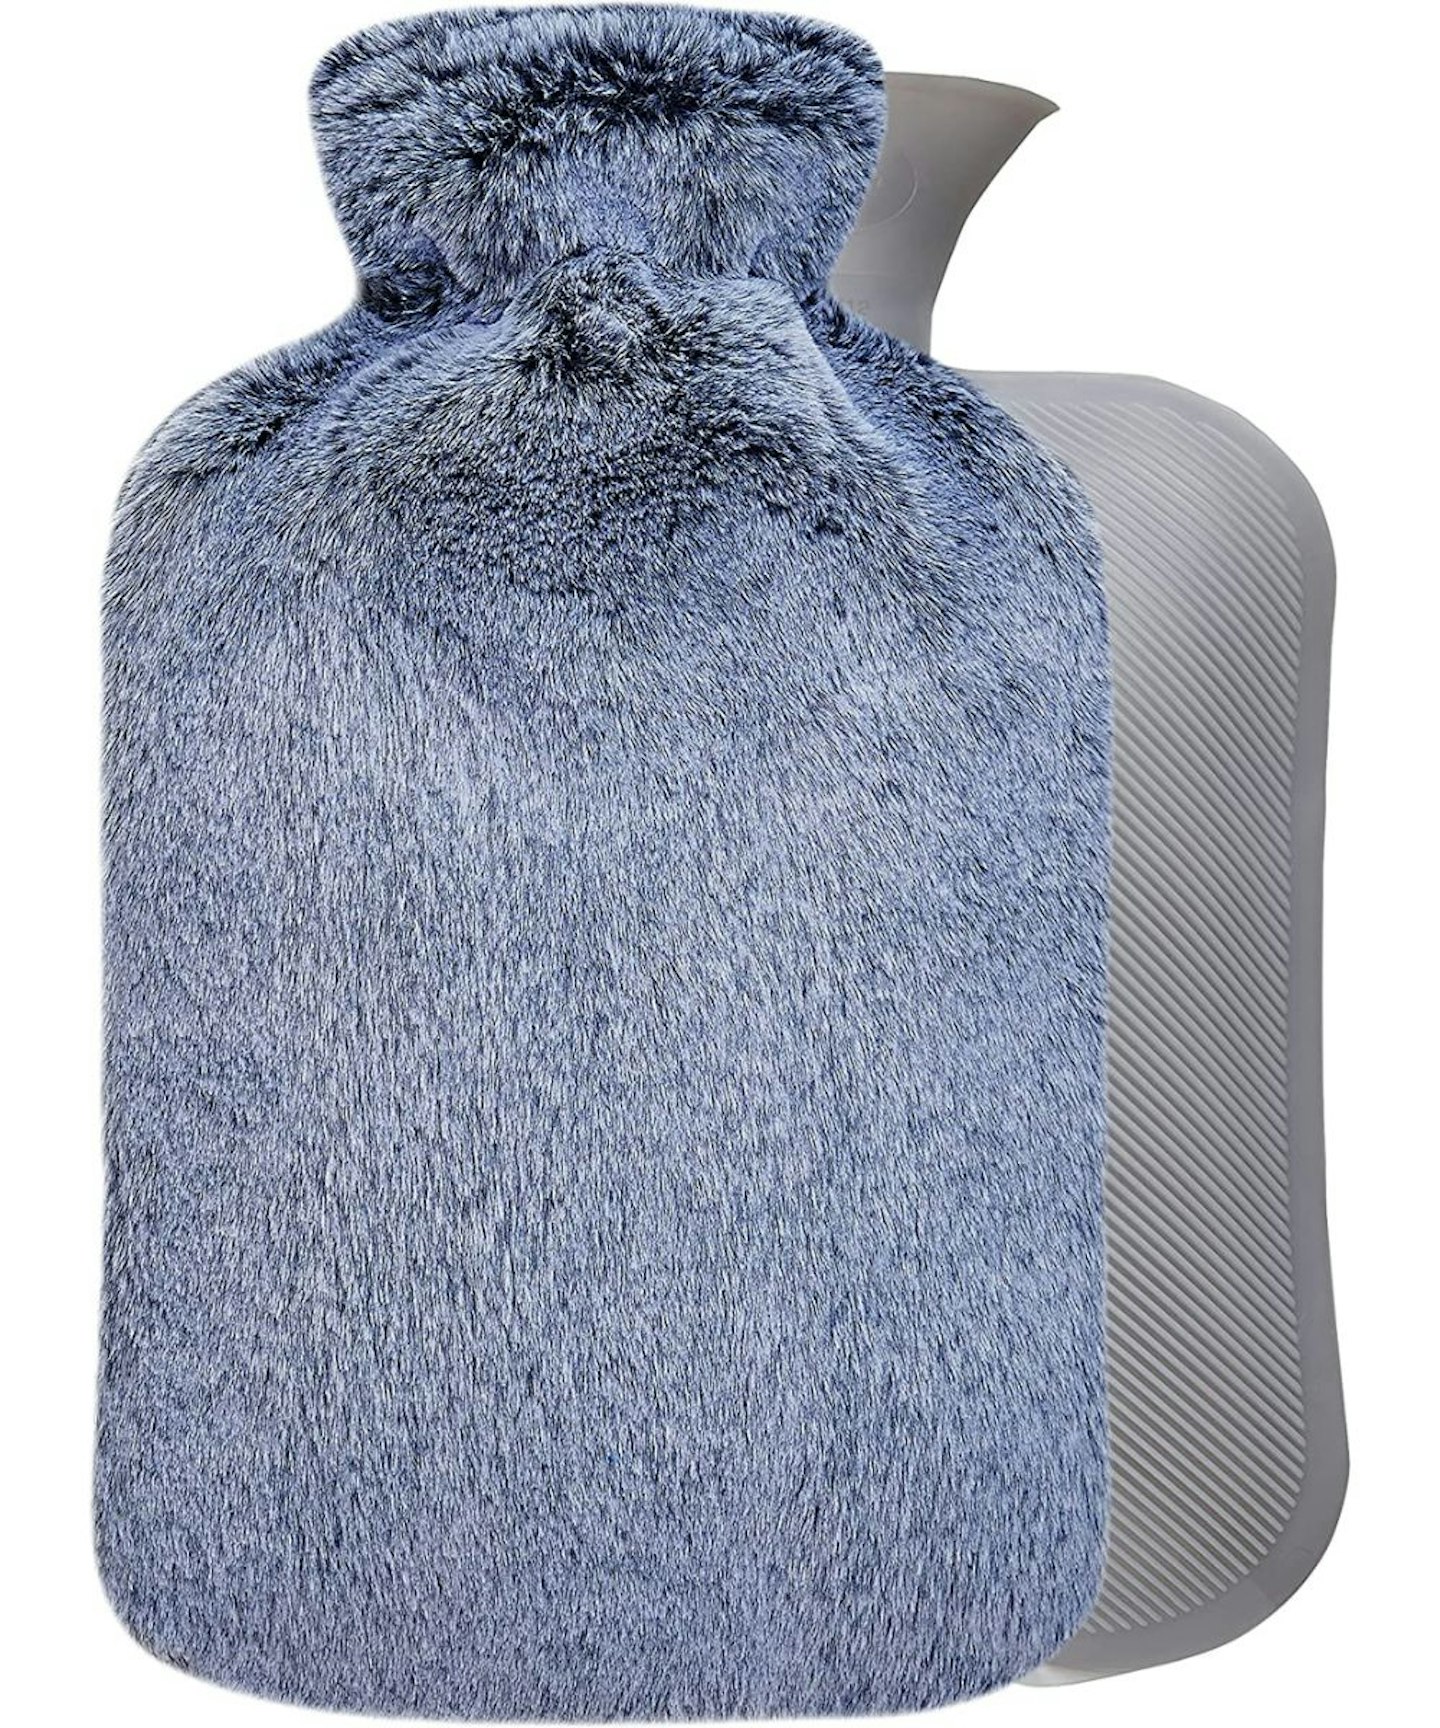 Qomfor Hot Water Bottle with Fluffy Cover 